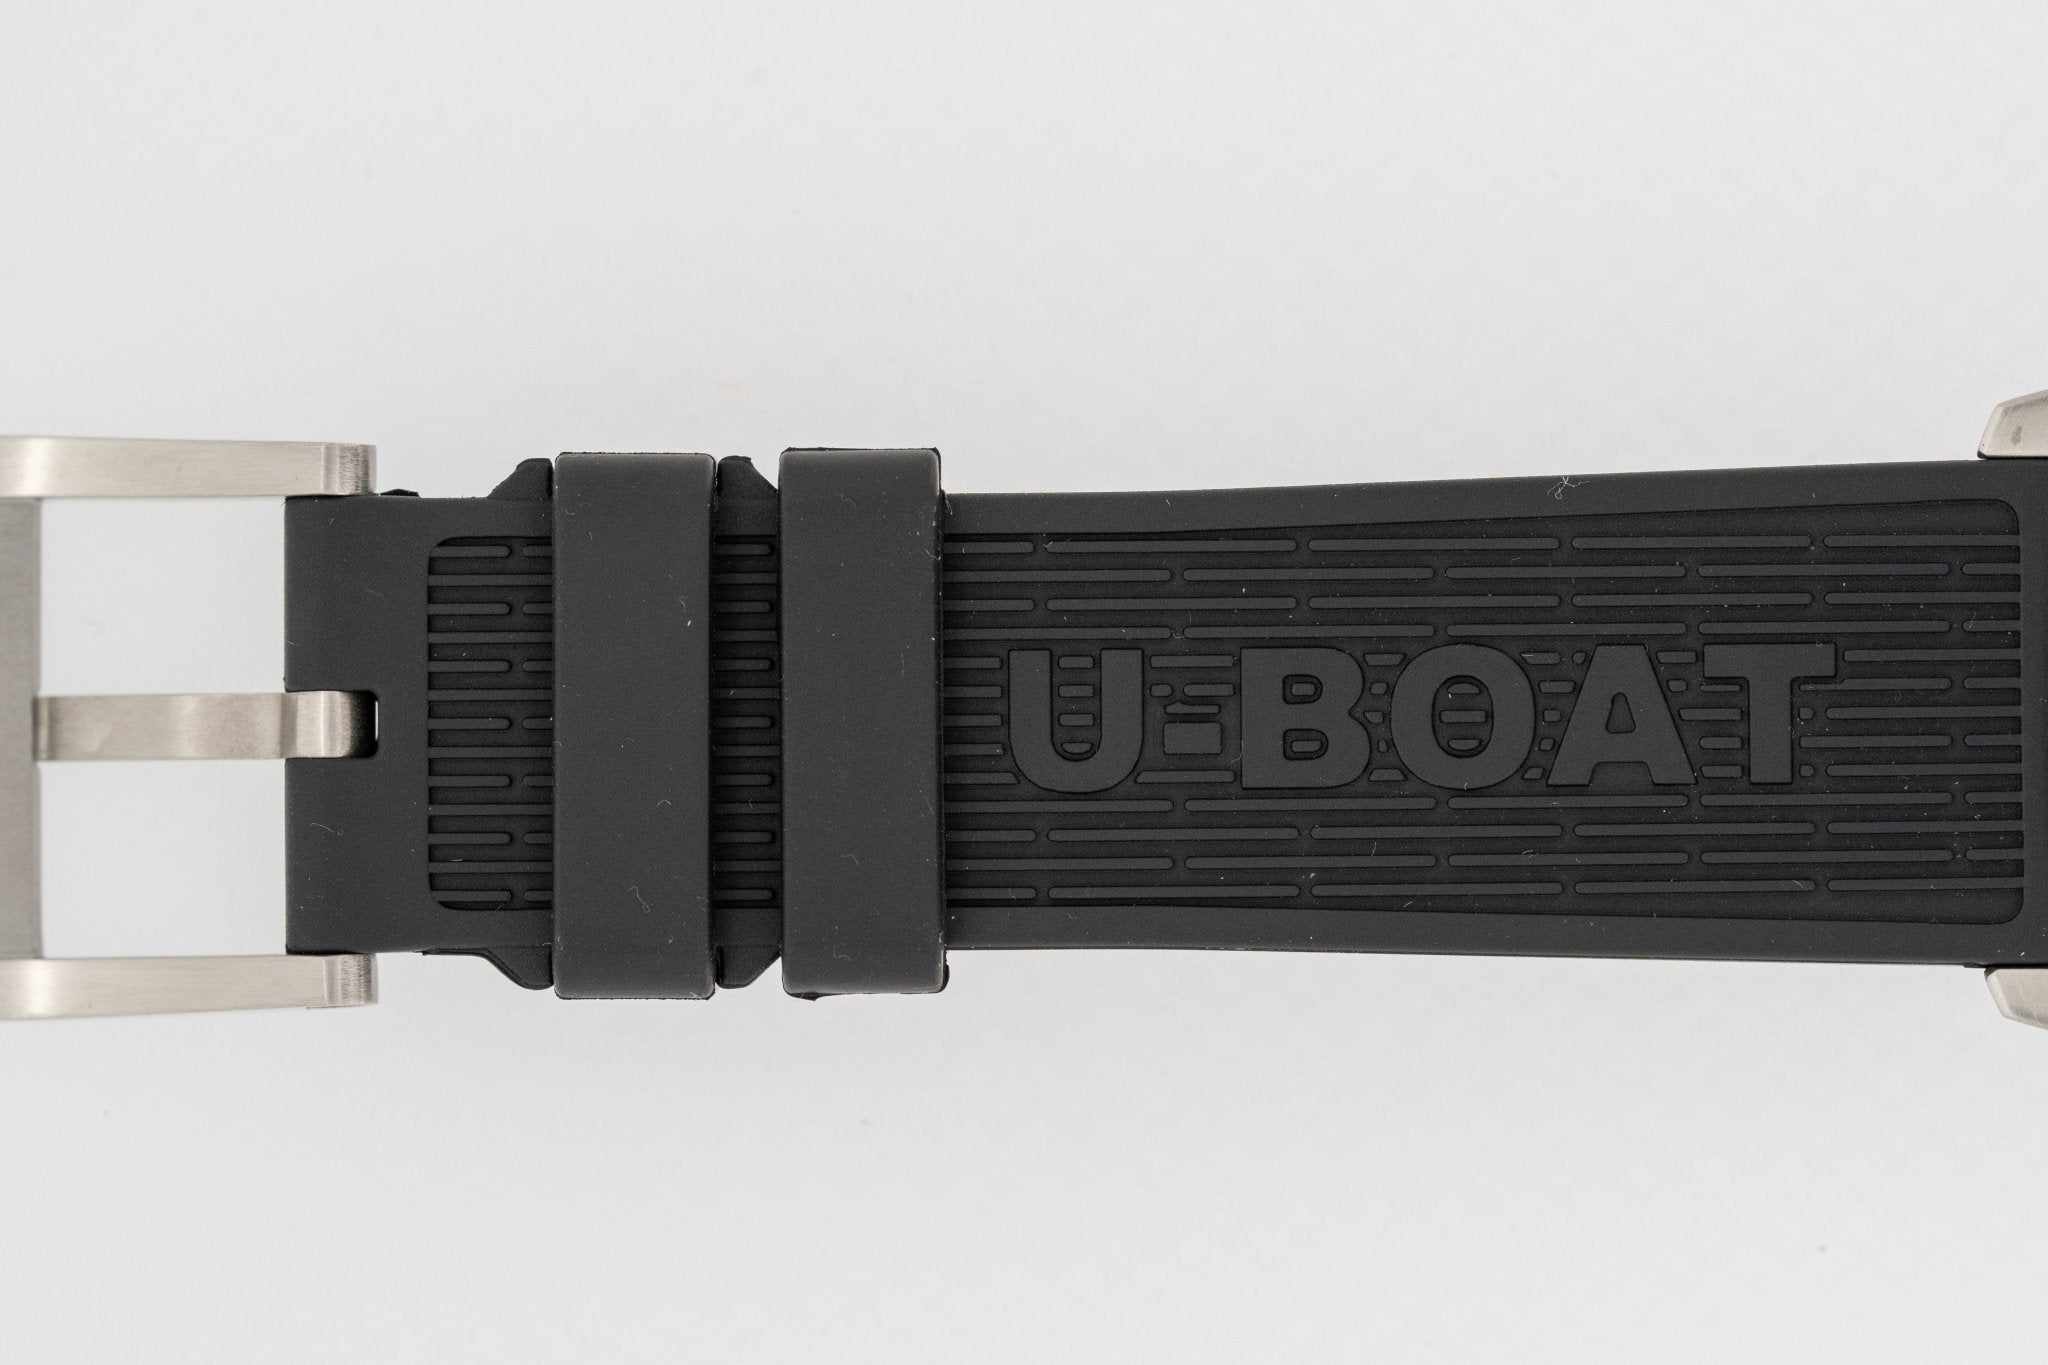 U-Boat Sommerso Diver Black Silicone Strap - Watches & Crystals